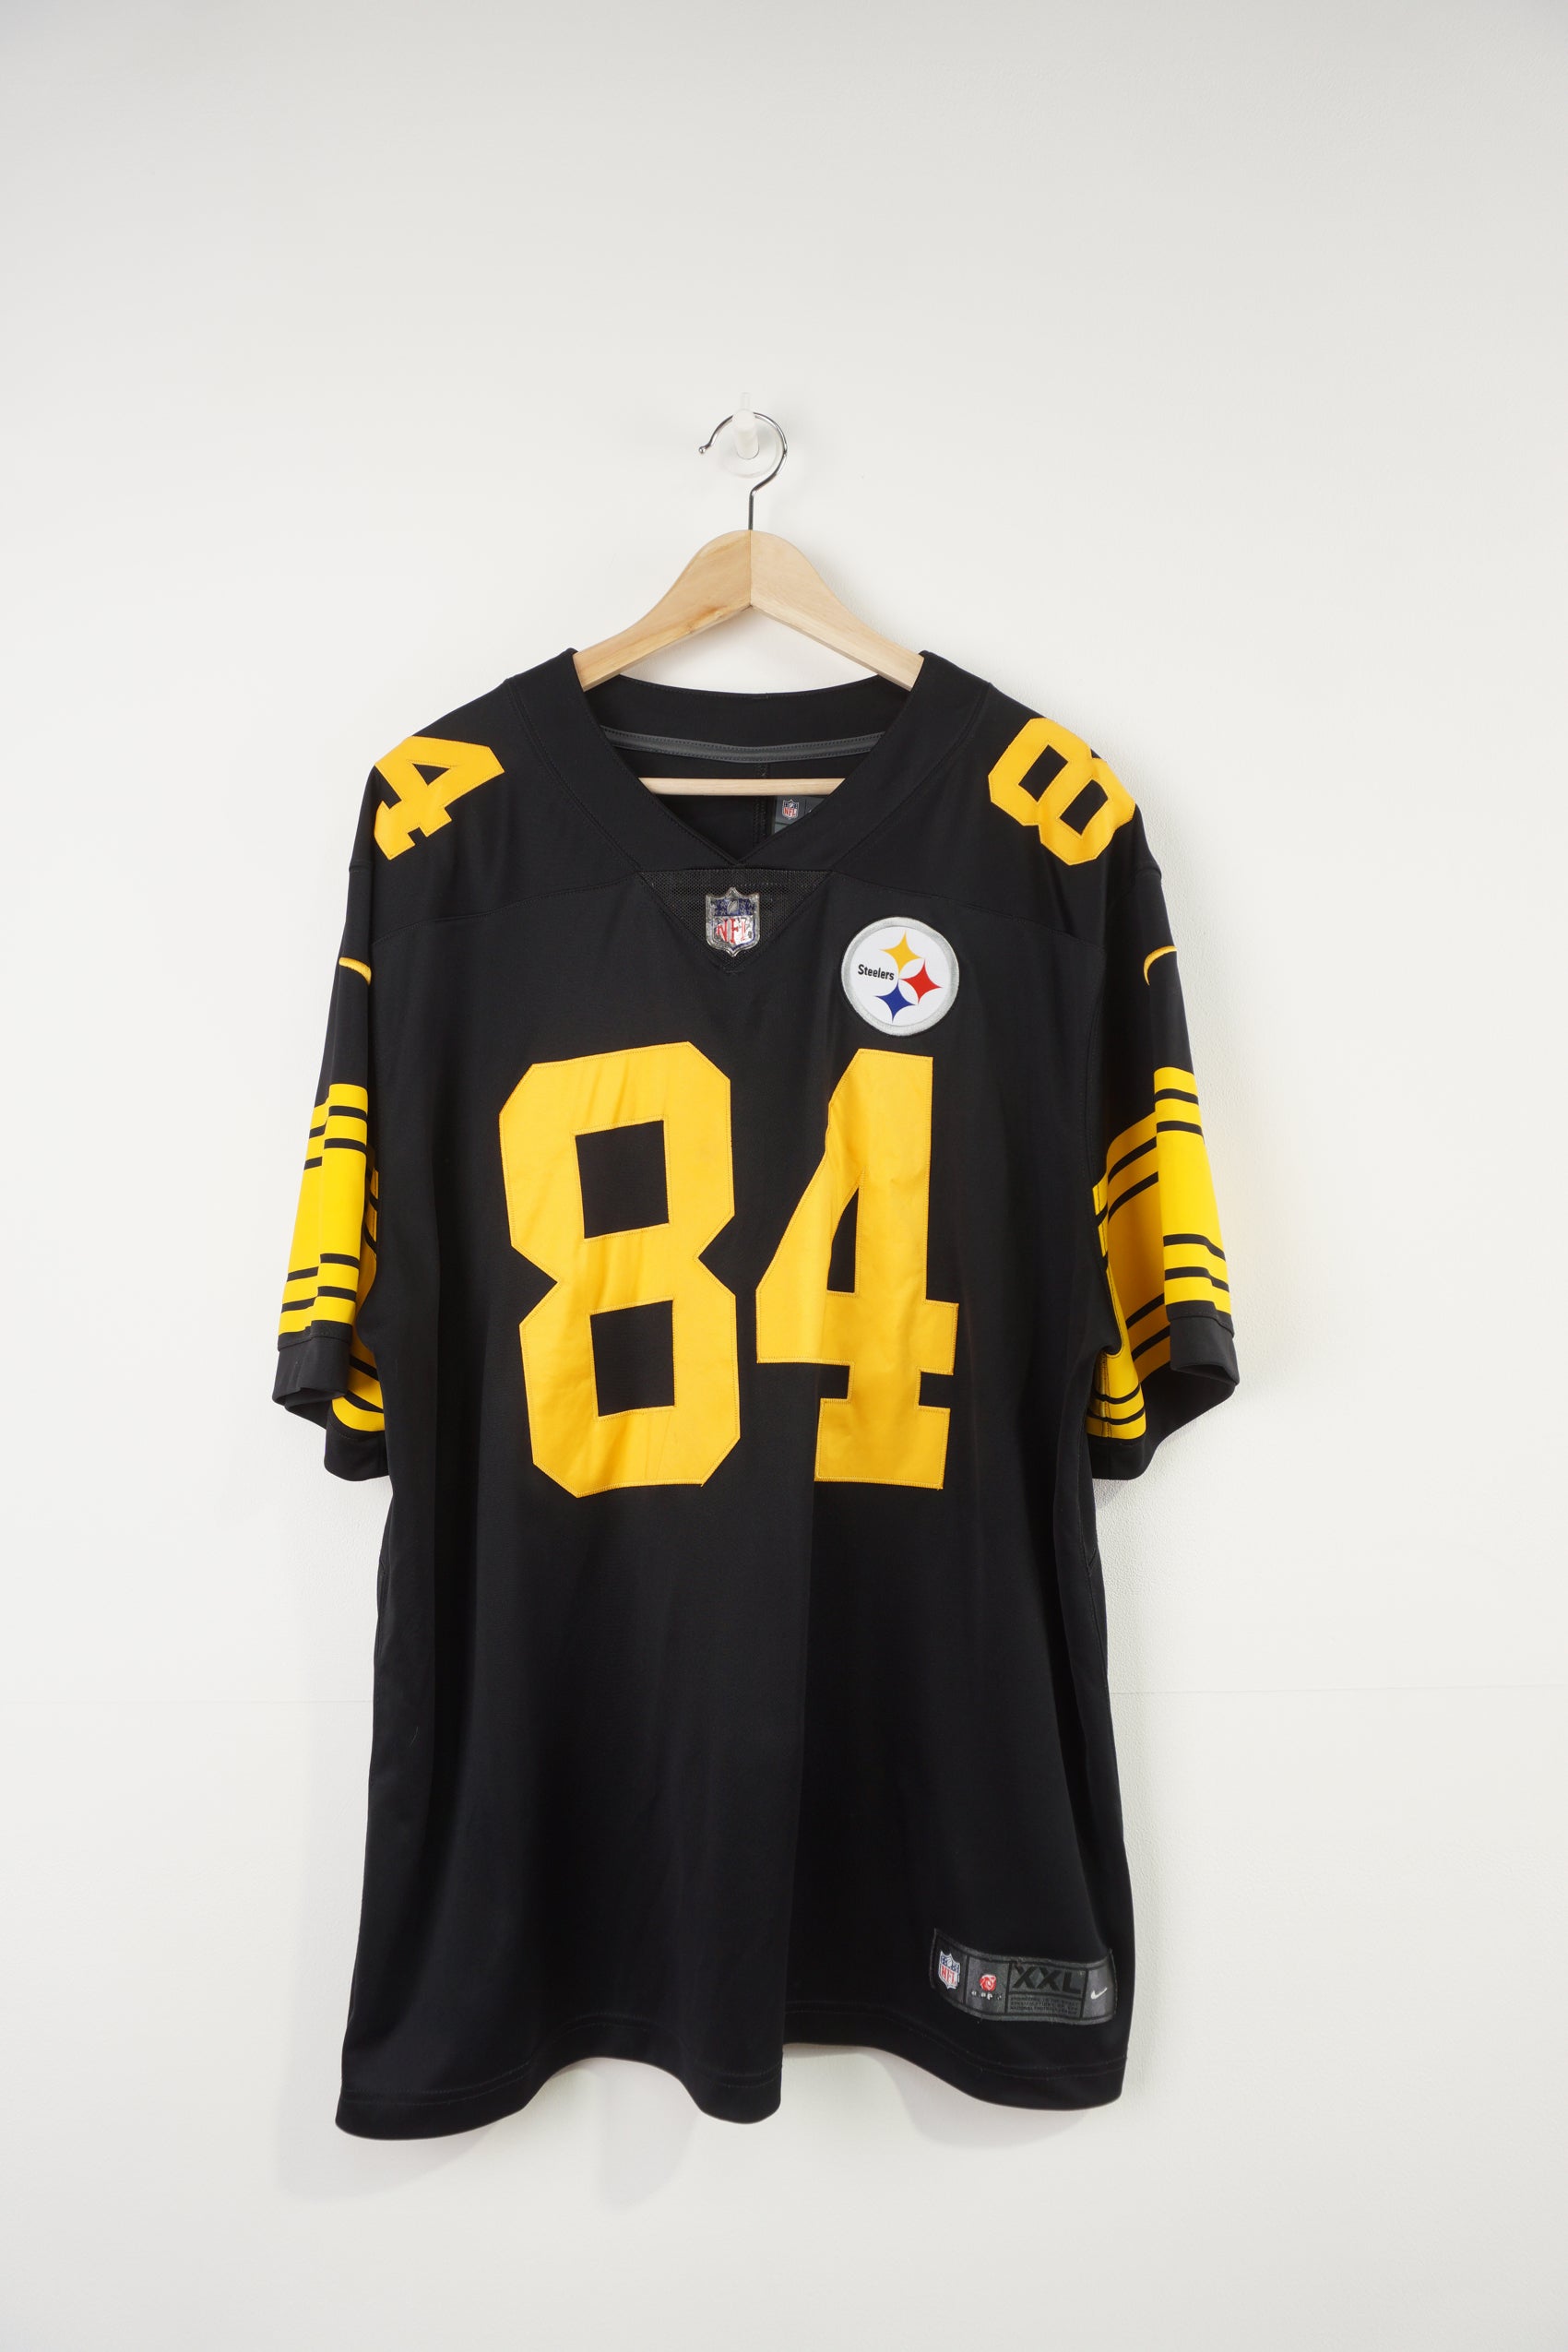 steelers black and yellow jersey